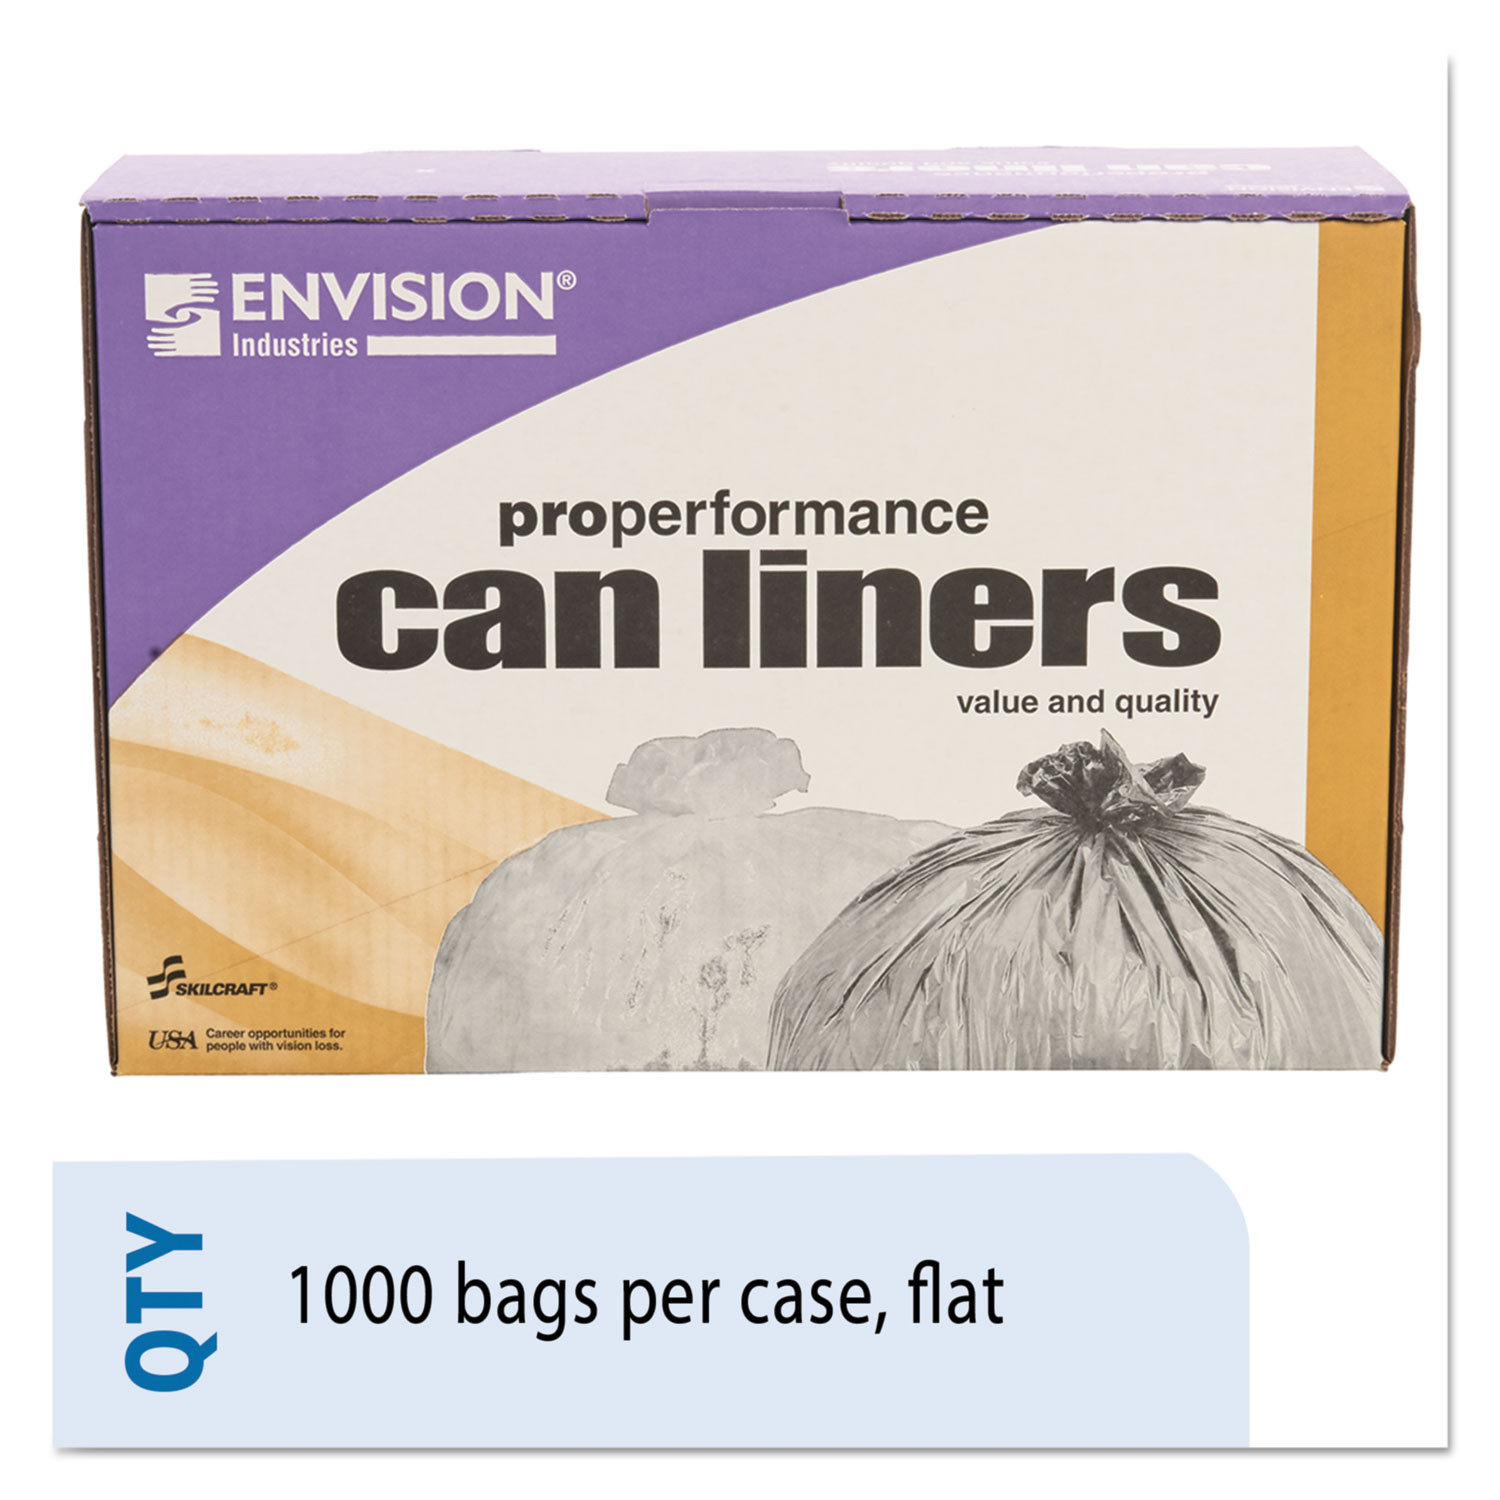 Commercial trash bags 10 gallon 24x24 1.0 mil case of 250